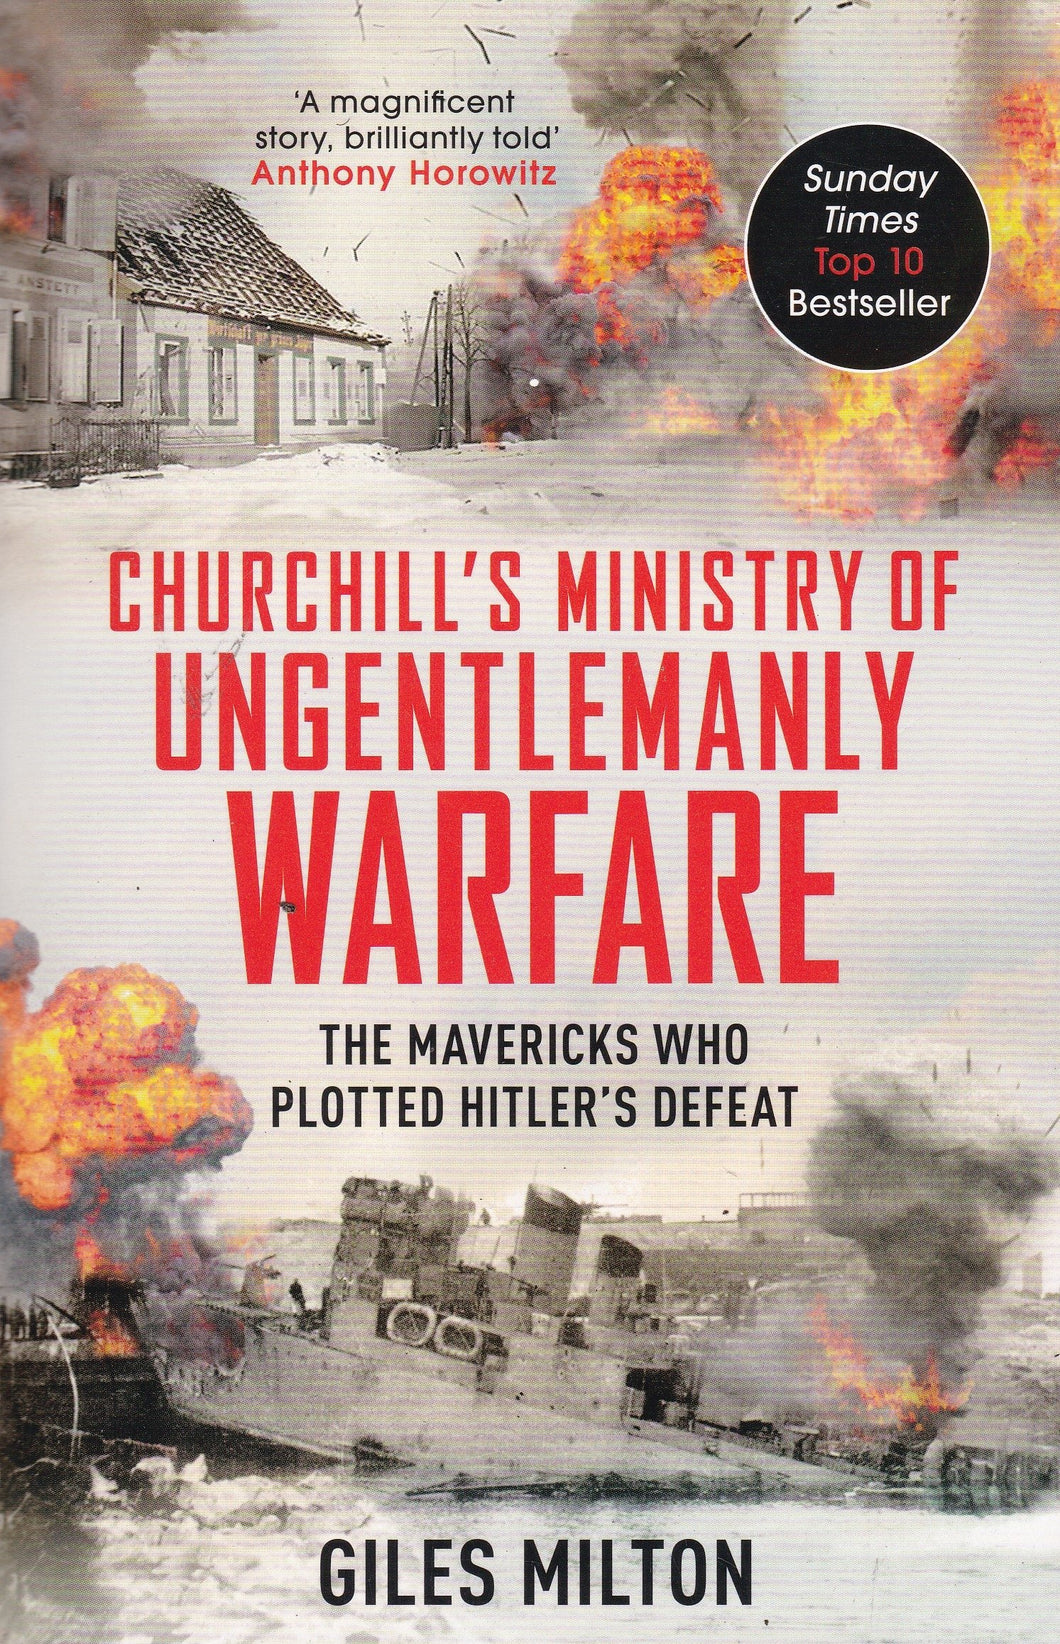 Churchill's Ministry of Ungentlemanly Warfare, Giles Milton